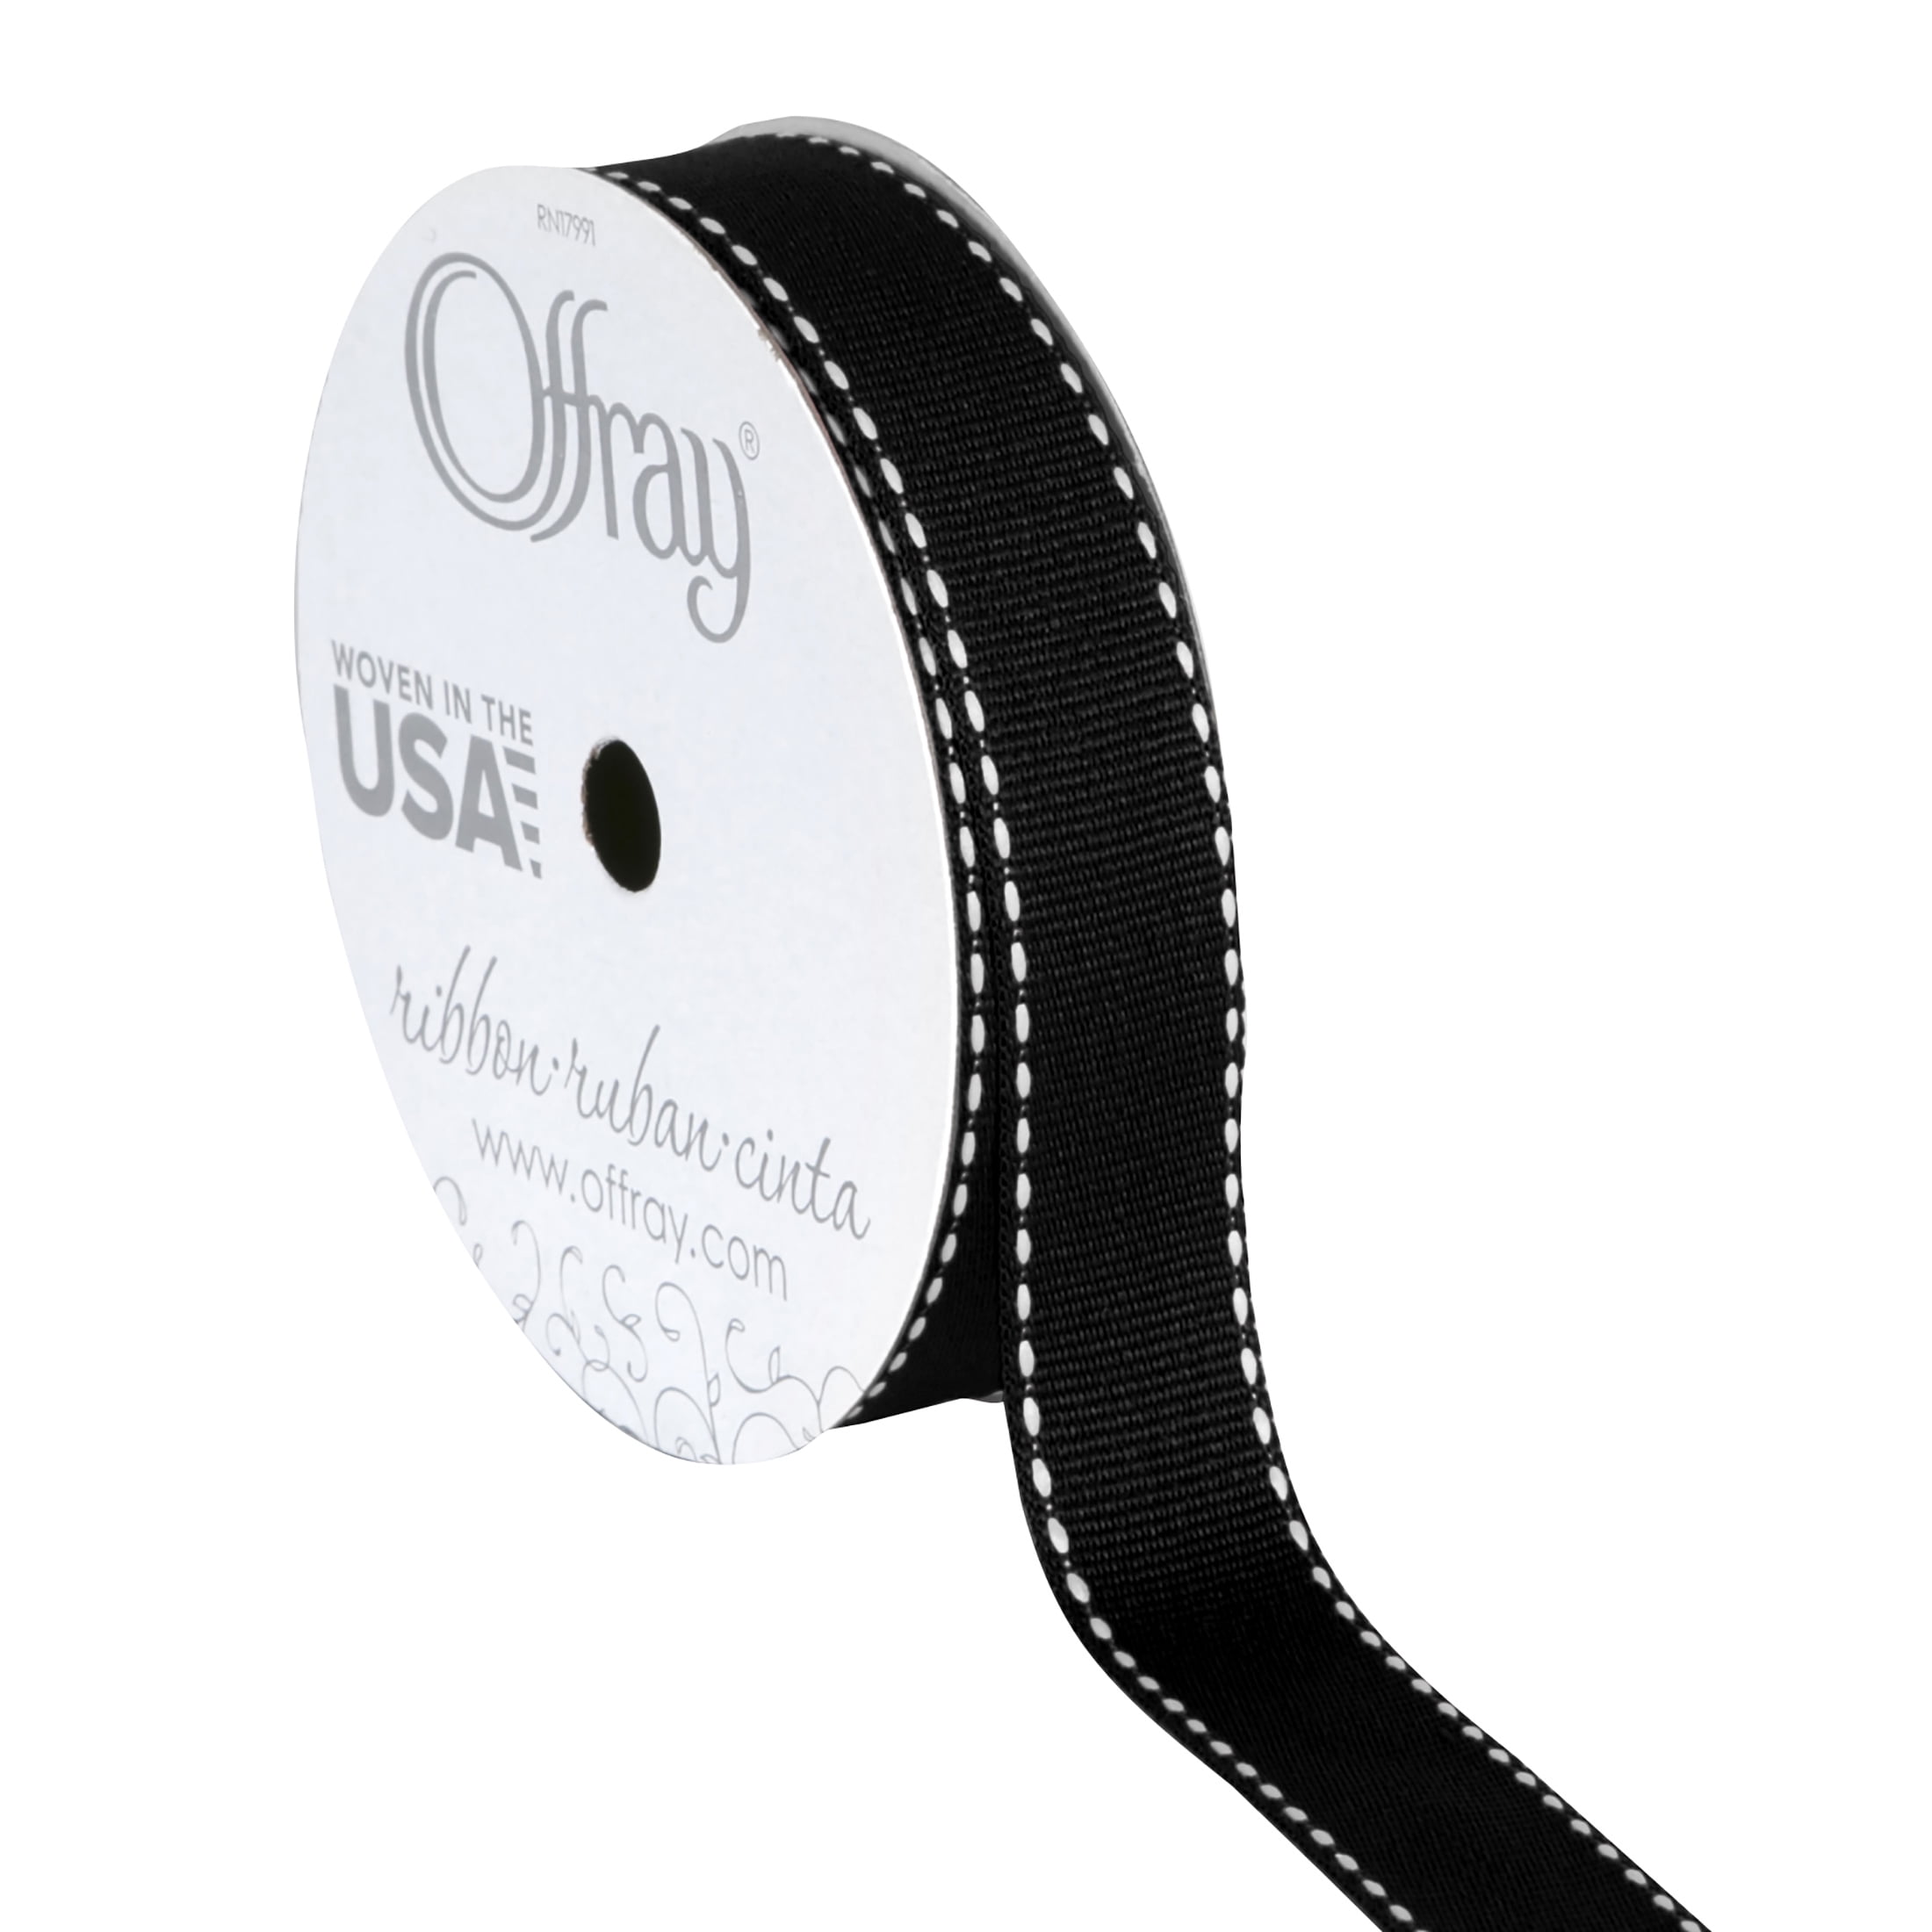 Offray Ribbon, Black and White 5/8 inch Grosgrain Polyester Ribbon, 9 feet